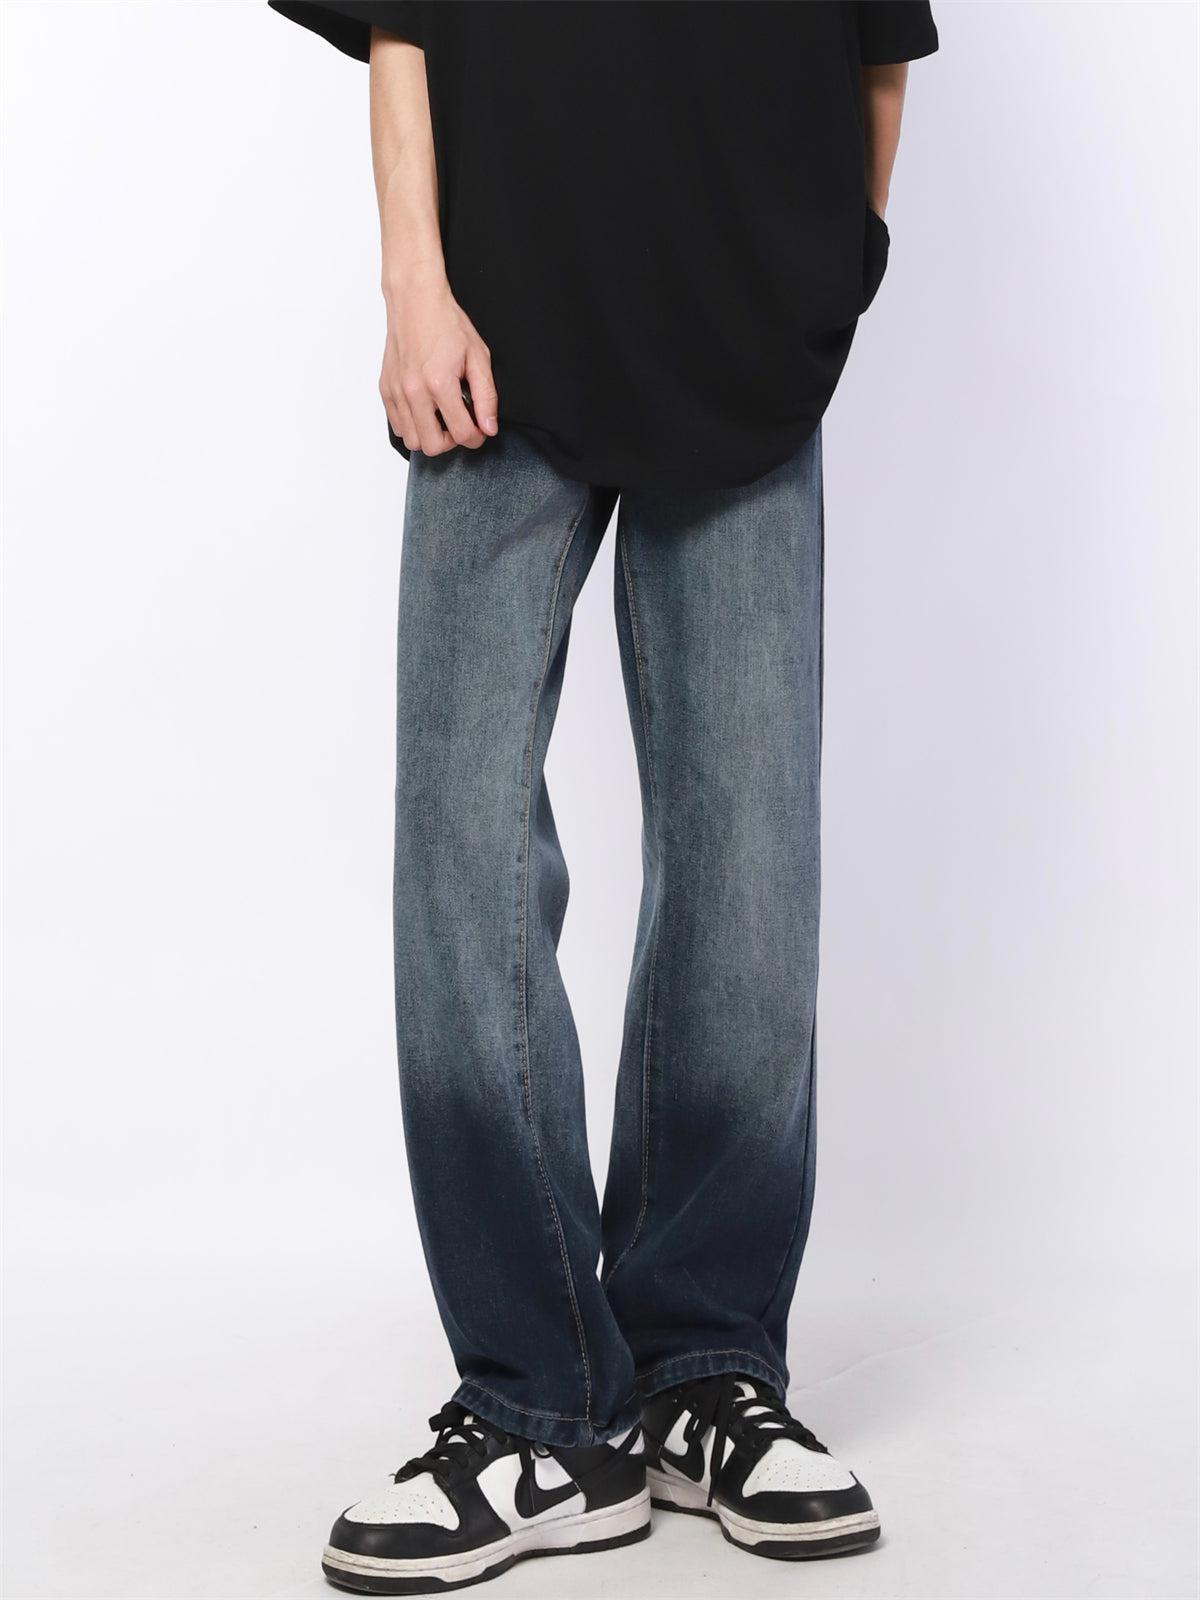 Made Extreme Gradient Washed Straight Leg Jeans Korean Street Fashion Jeans By Made Extreme Shop Online at OH Vault